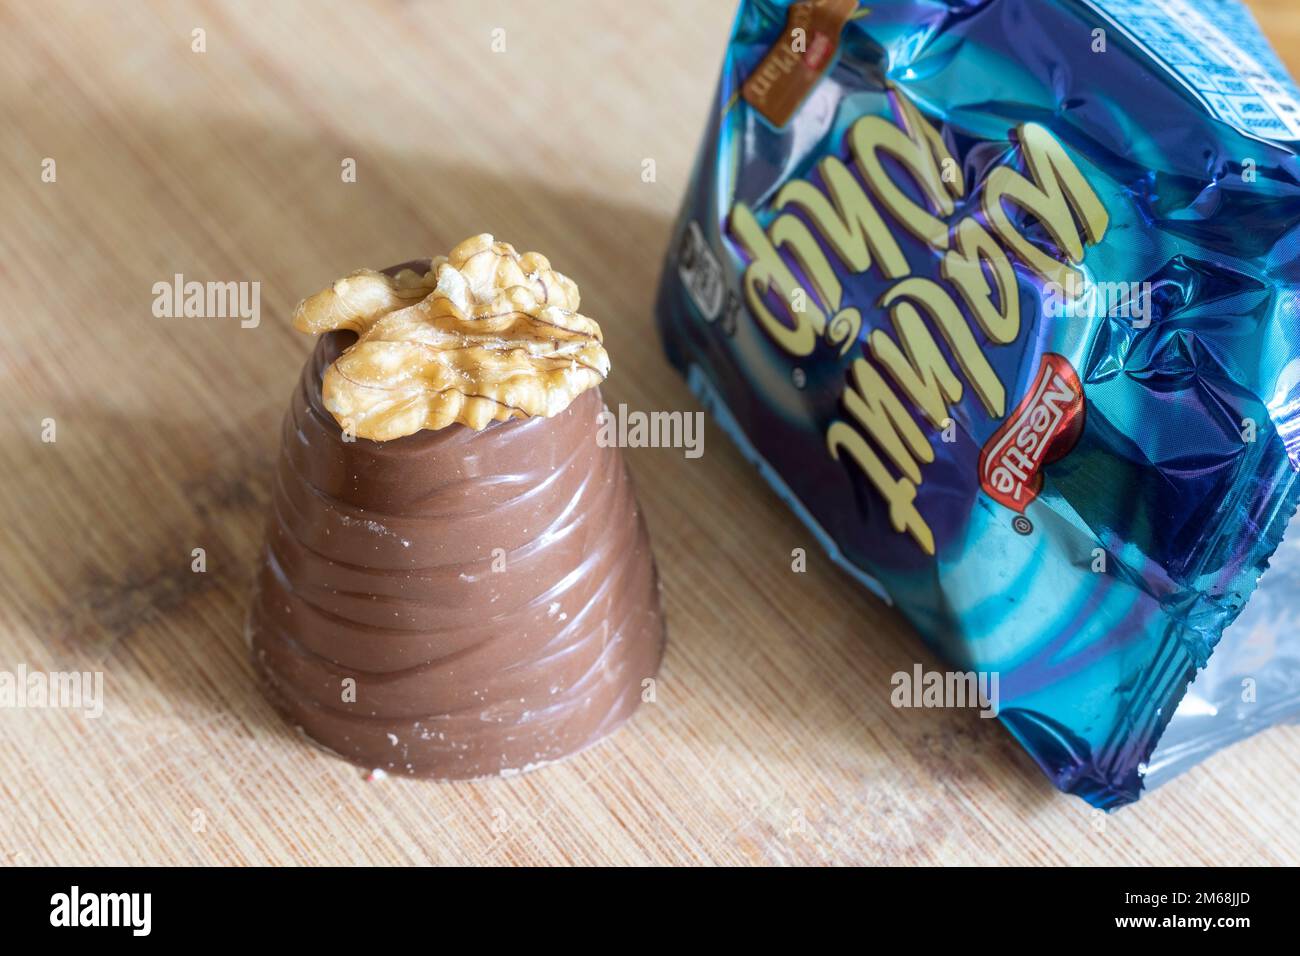 A Walnut whip, a sweet treat made by Nestle consisting of chocolate filled with marshmallow and topped with a walnut. Stock Photo